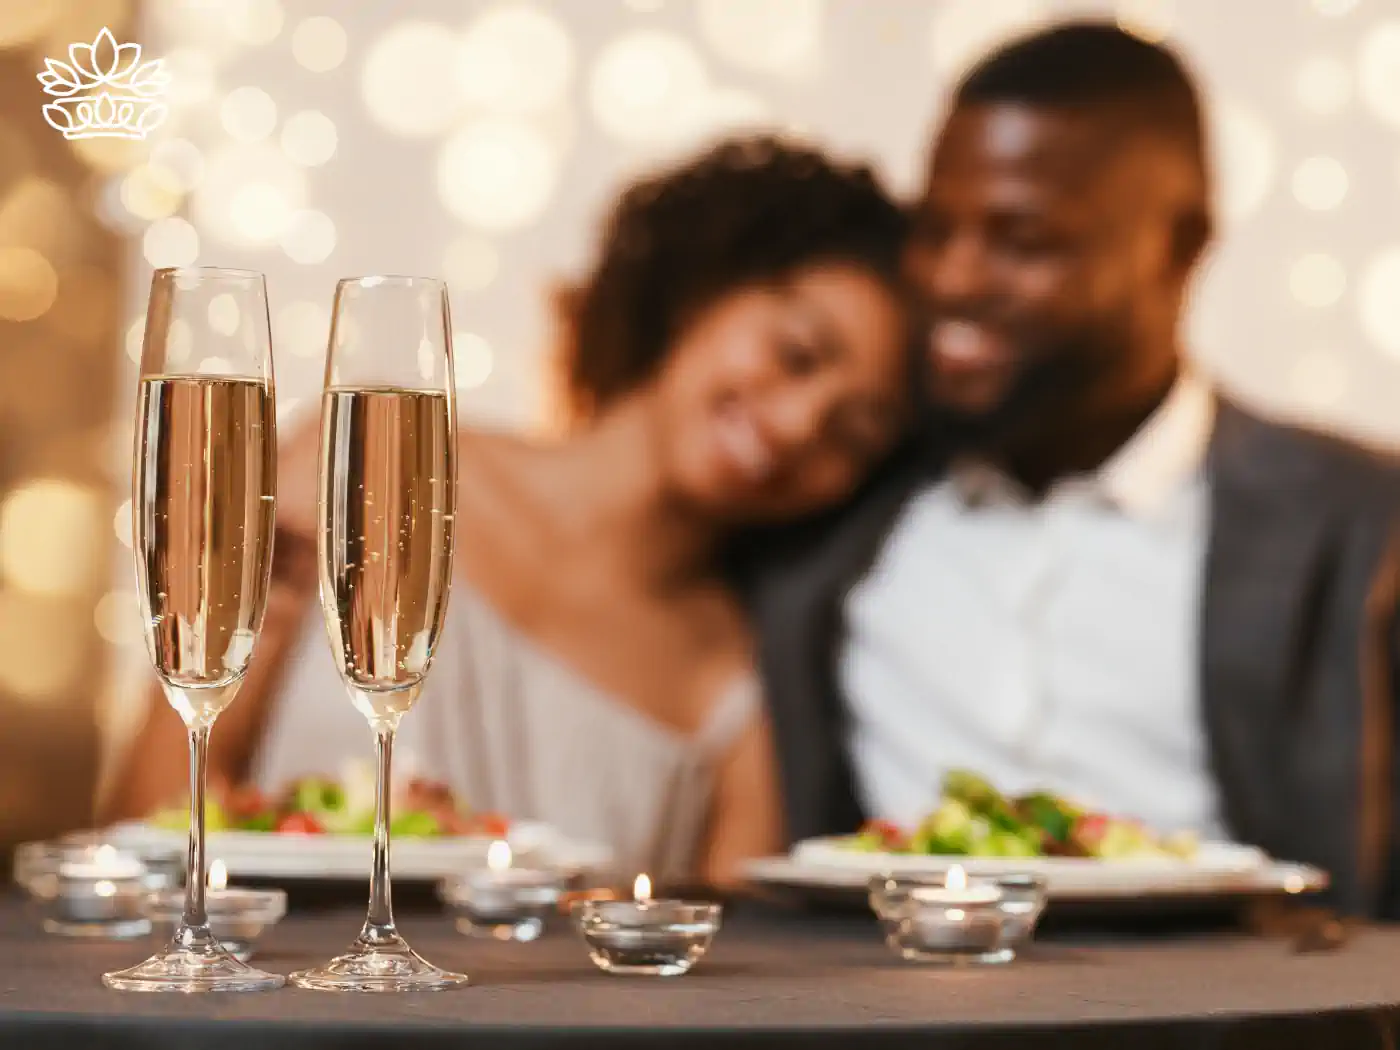 A couple enjoying a romantic dinner with champagne glasses in the foreground, illuminated by soft, twinkling lights, embodying a warm, celebratory Valentine's Day atmosphere. Fabulous Flowers and Gifts delivered with heart. Valentine's Day Flowers.